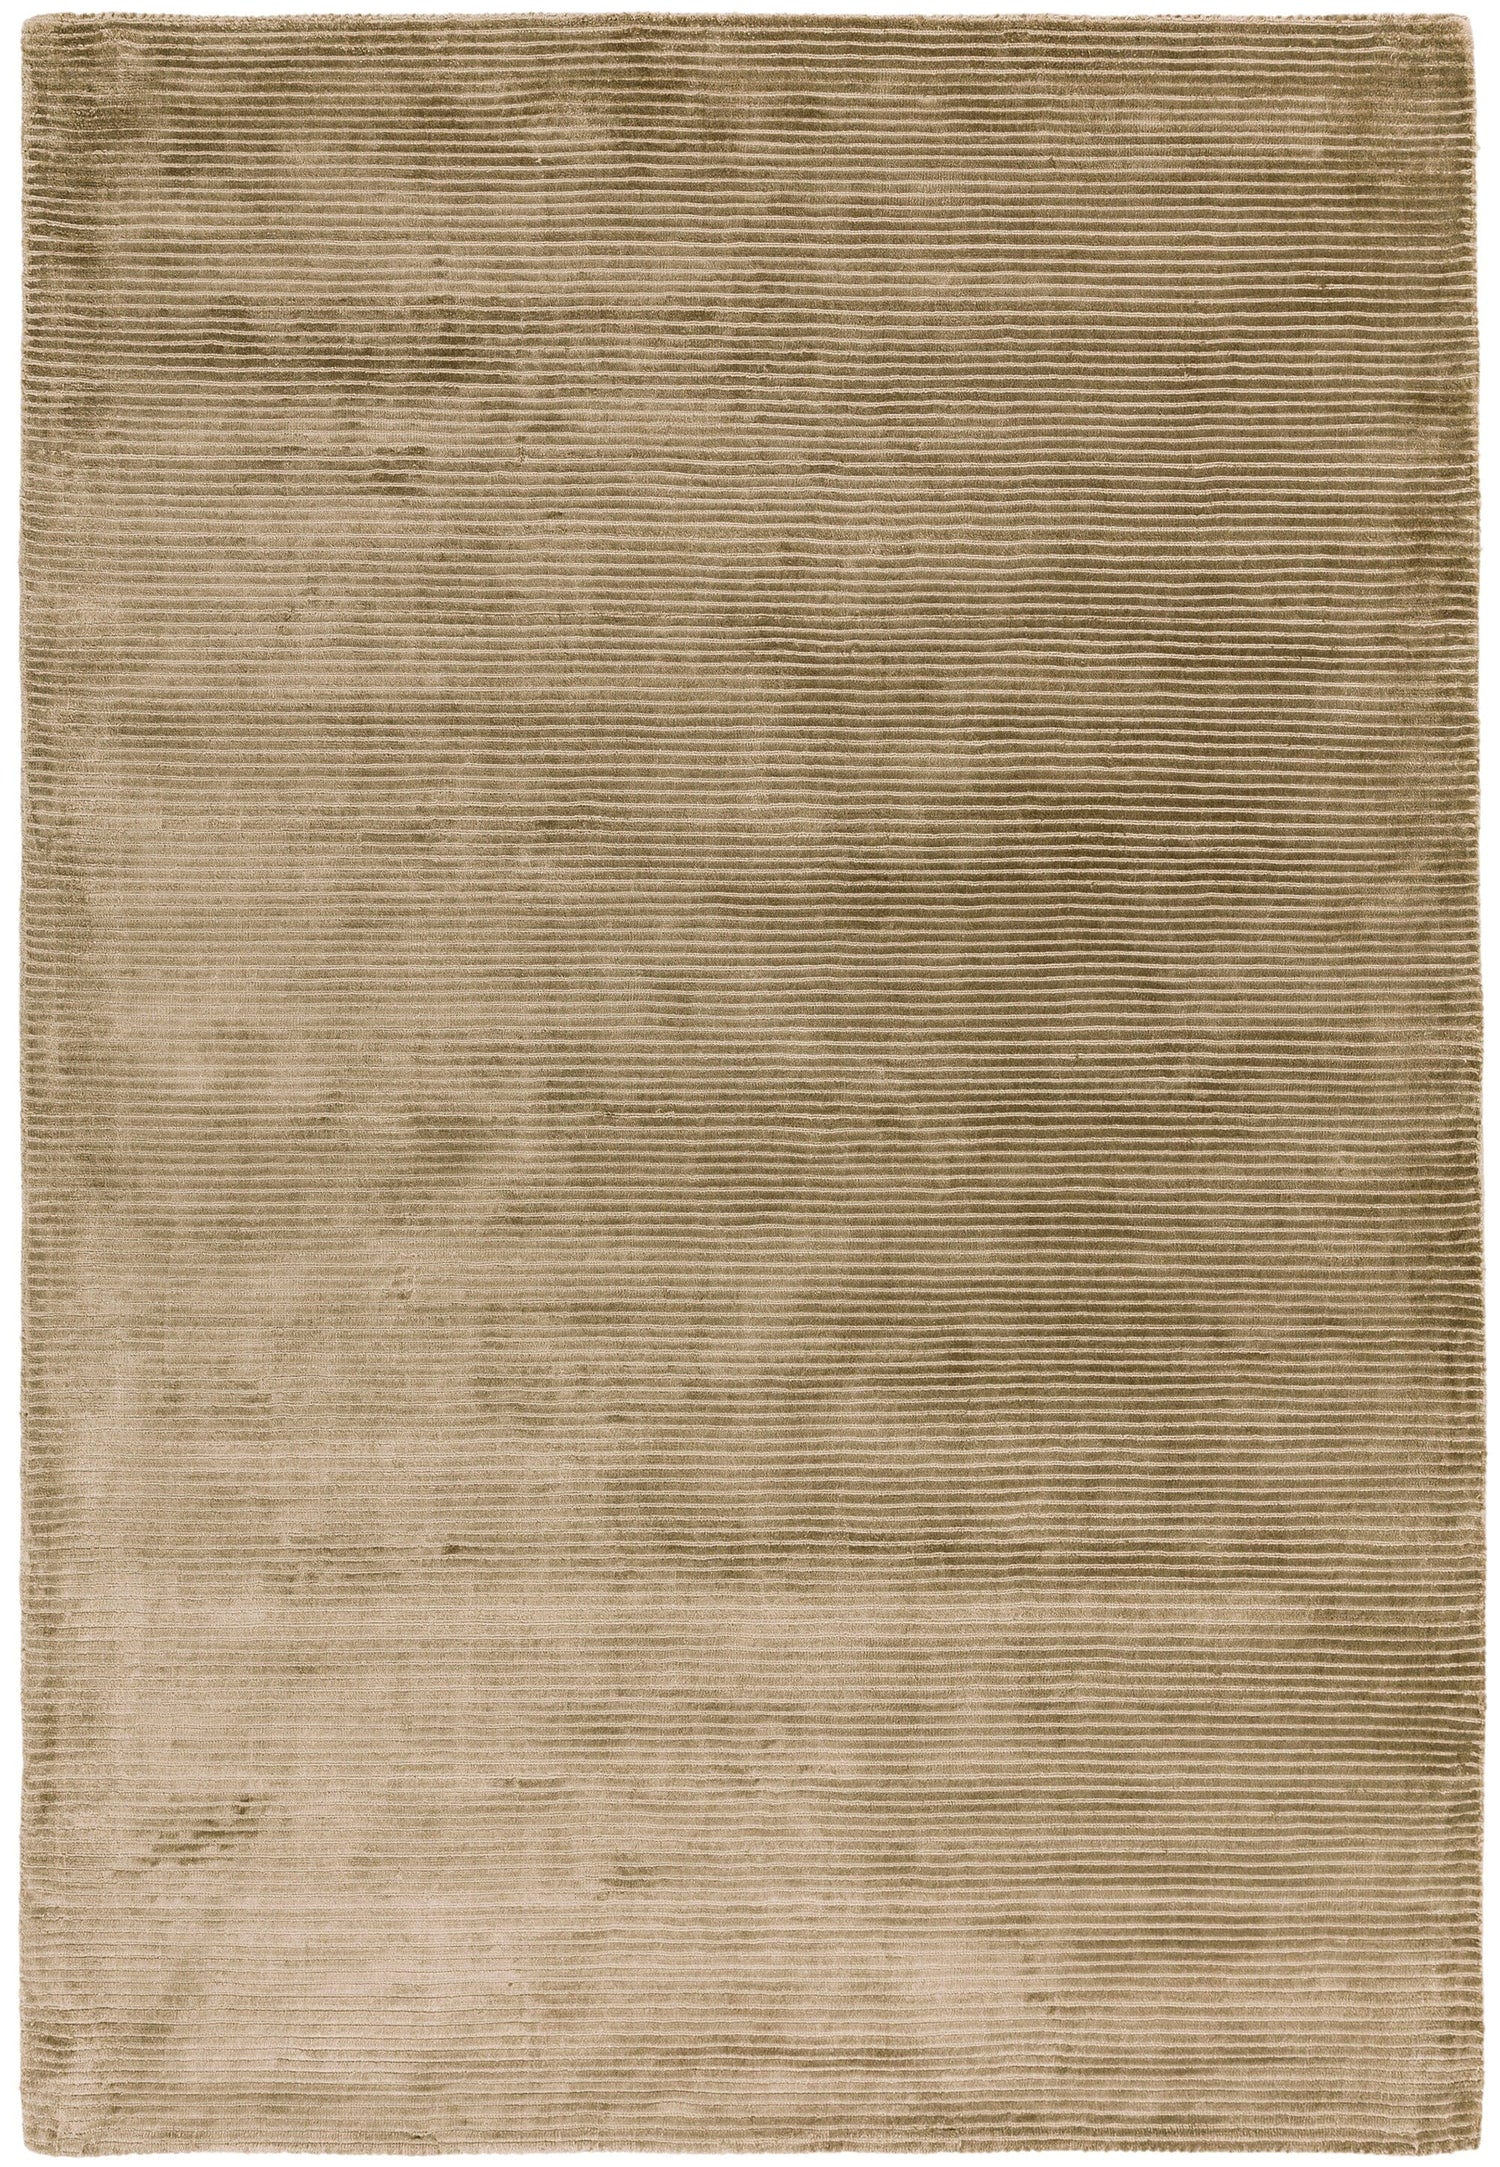  Asiatic Carpets-Asiatic Carpets Bellagio Hand Woven Rug Taupe - 160 x 230cm-Beige, Natural 669 